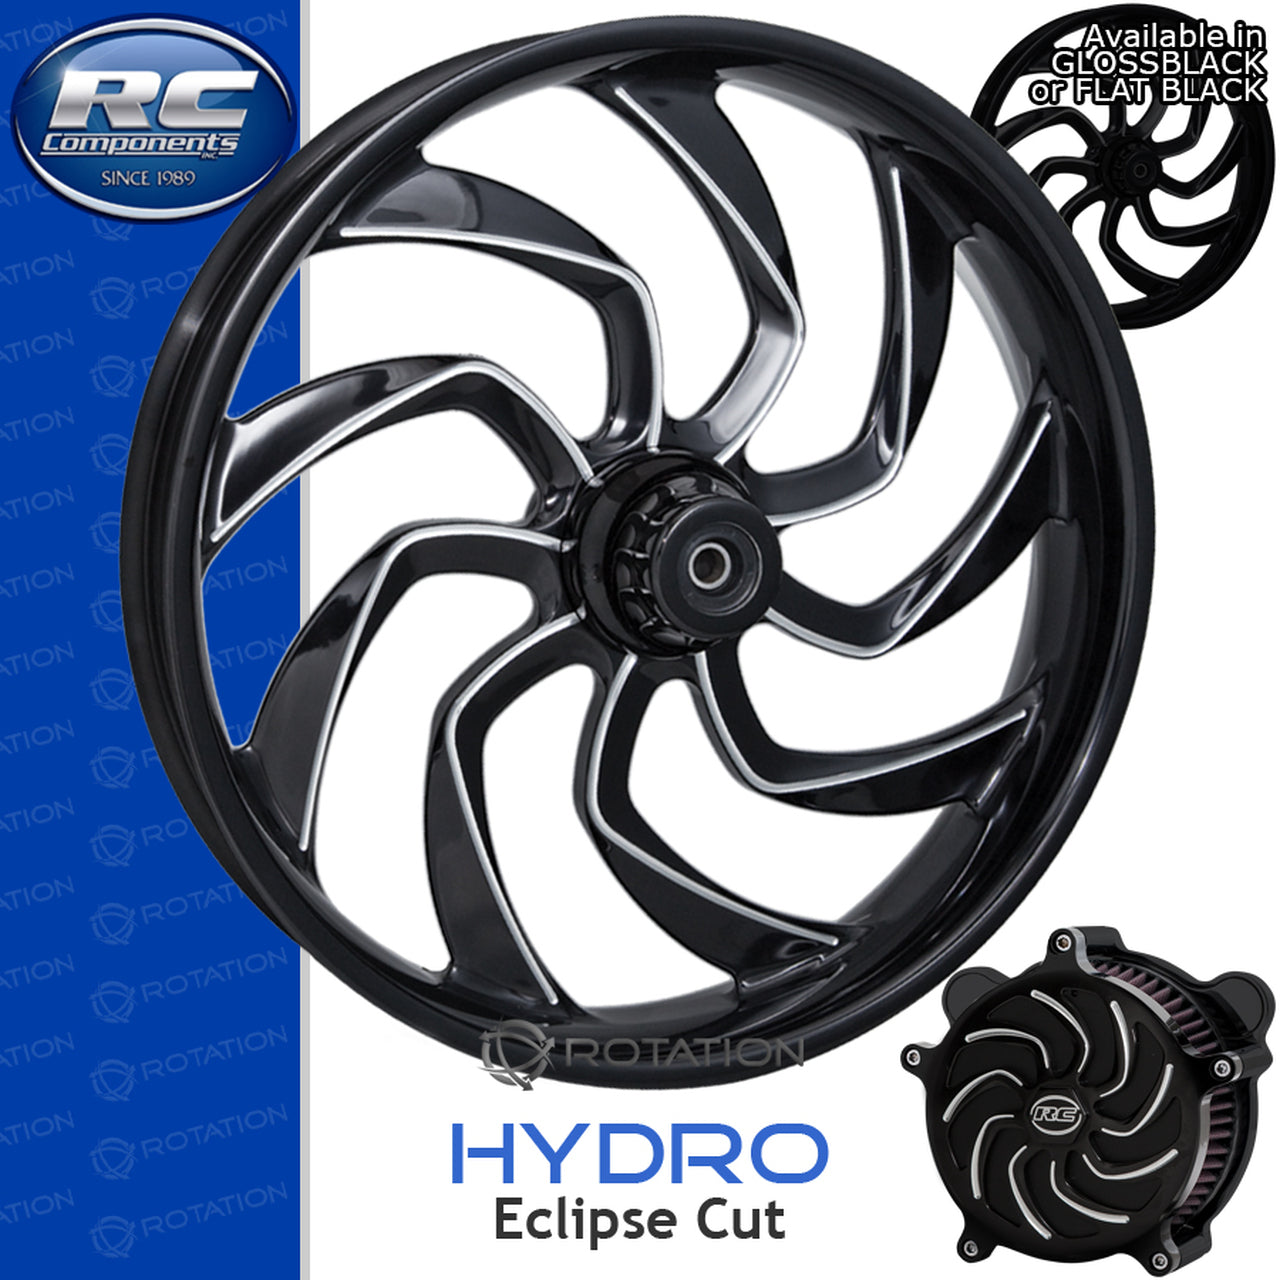 RC Components Hydro Eclipse Touring Wheel